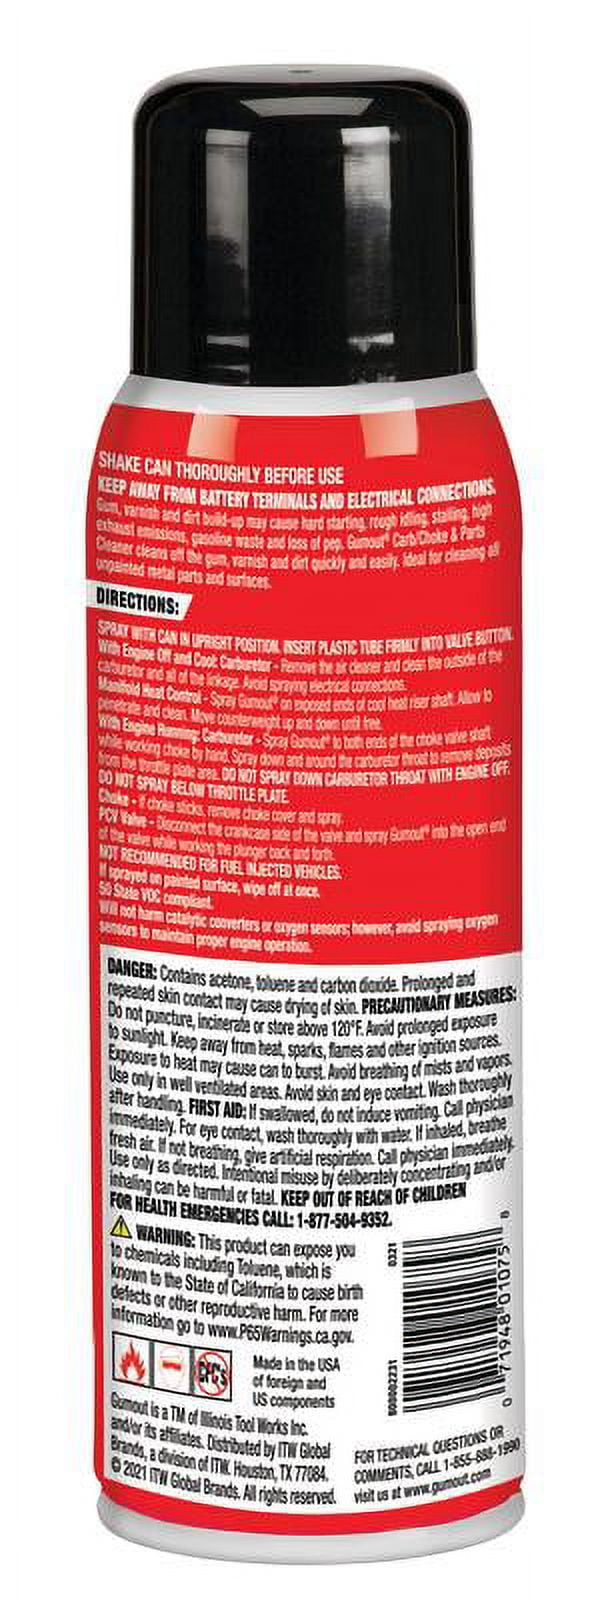 Gumout Carb/Choke and Parts Cleaner 14 oz - 800002231W 